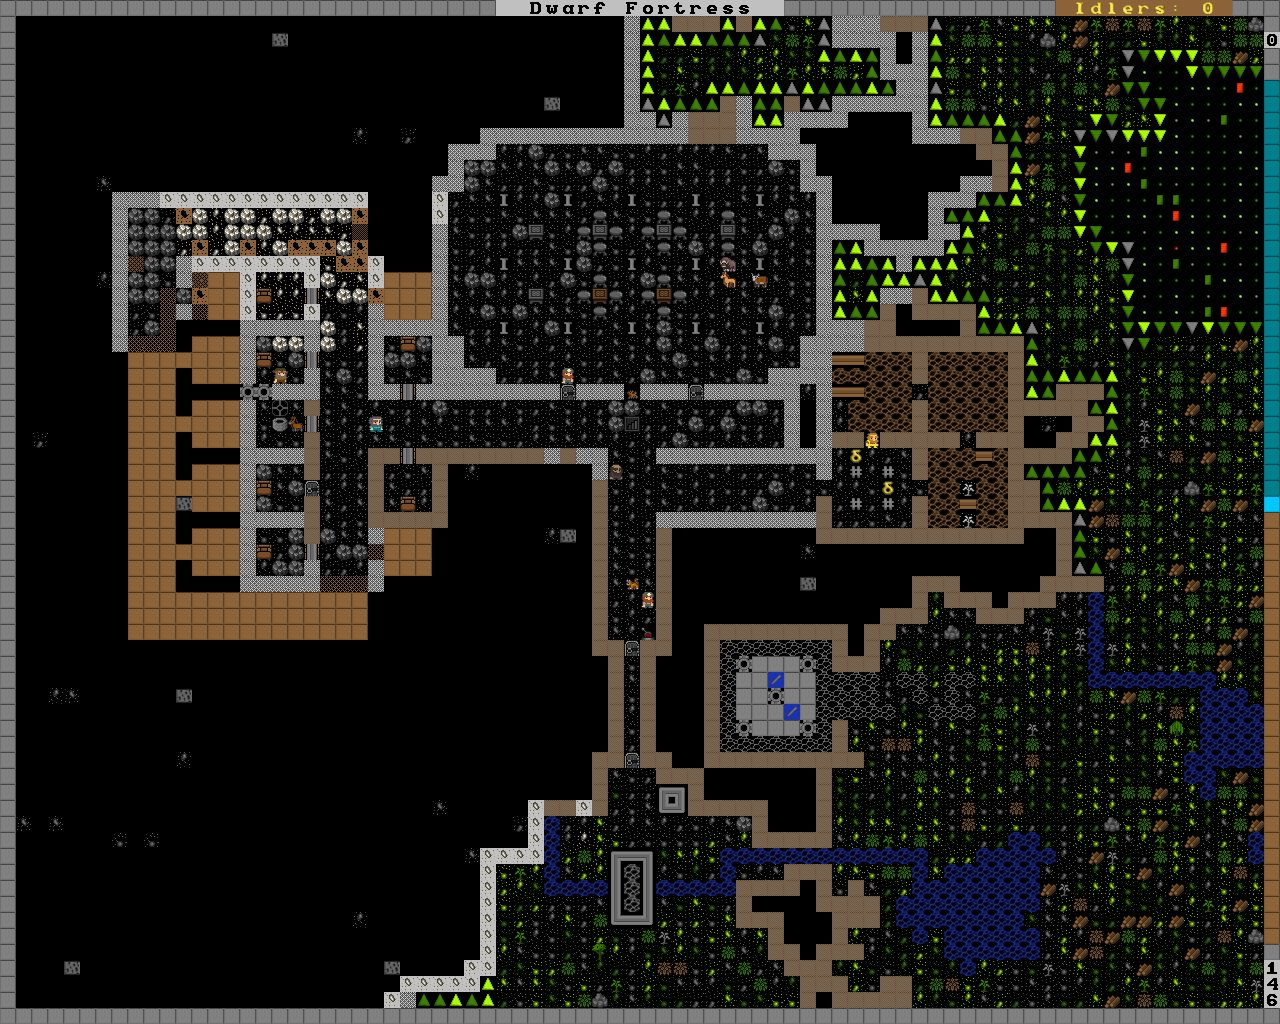 dwarf fortress tilesets not showing